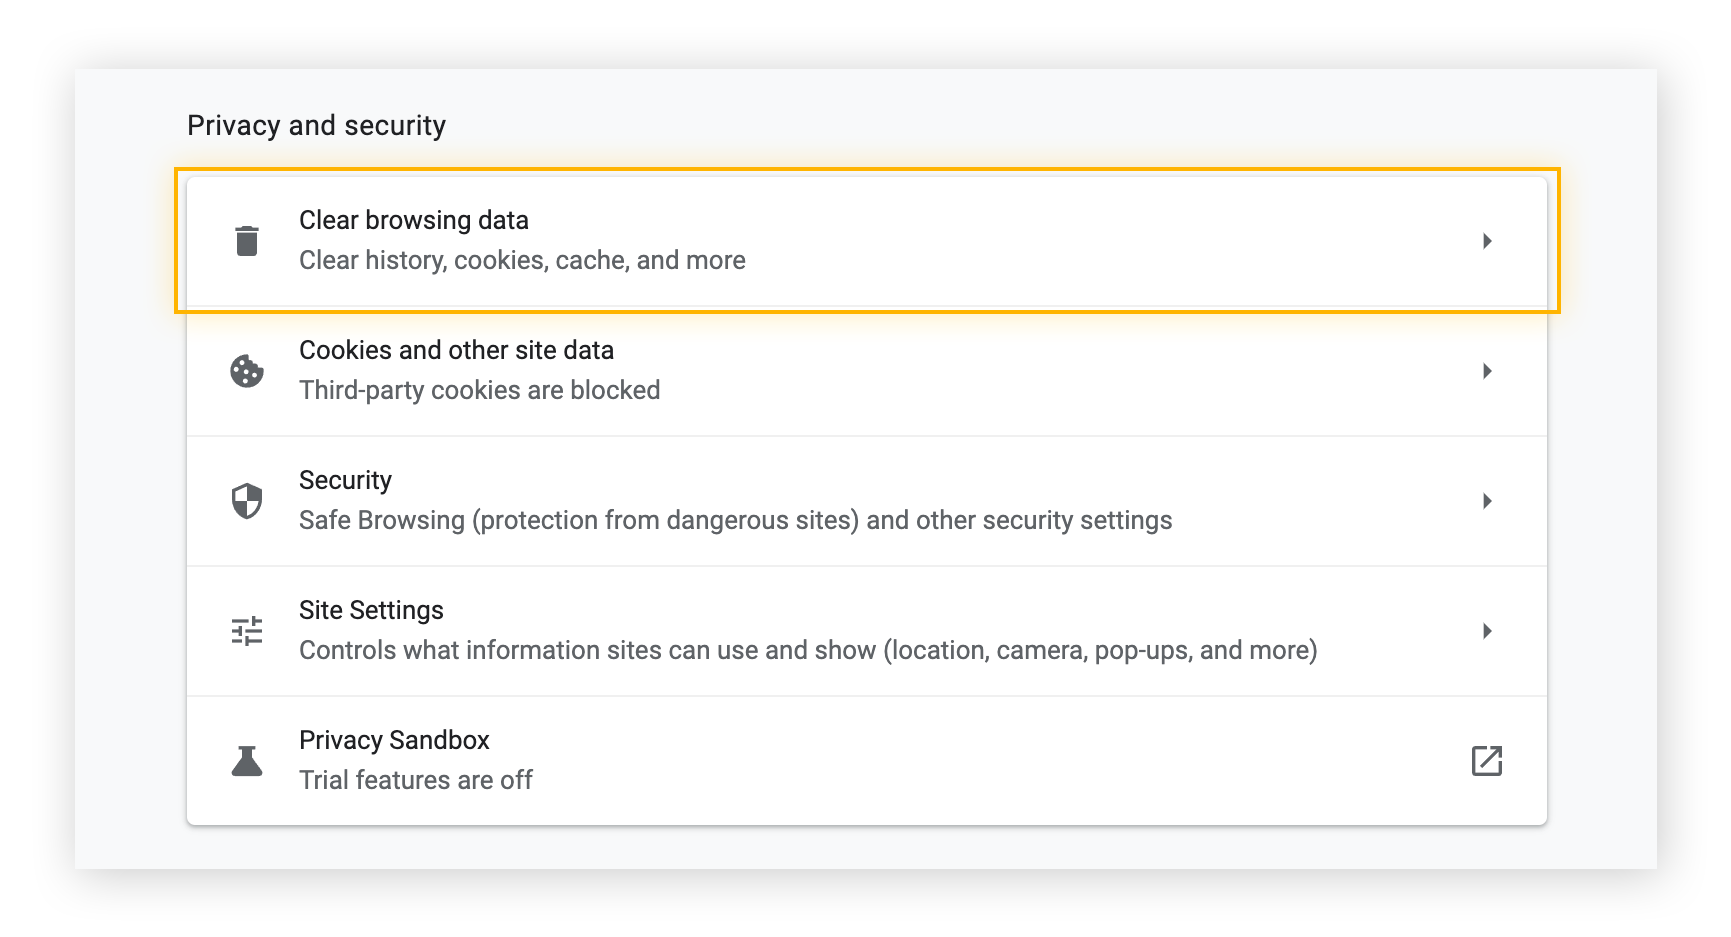 Privacy and security settings in Chrome